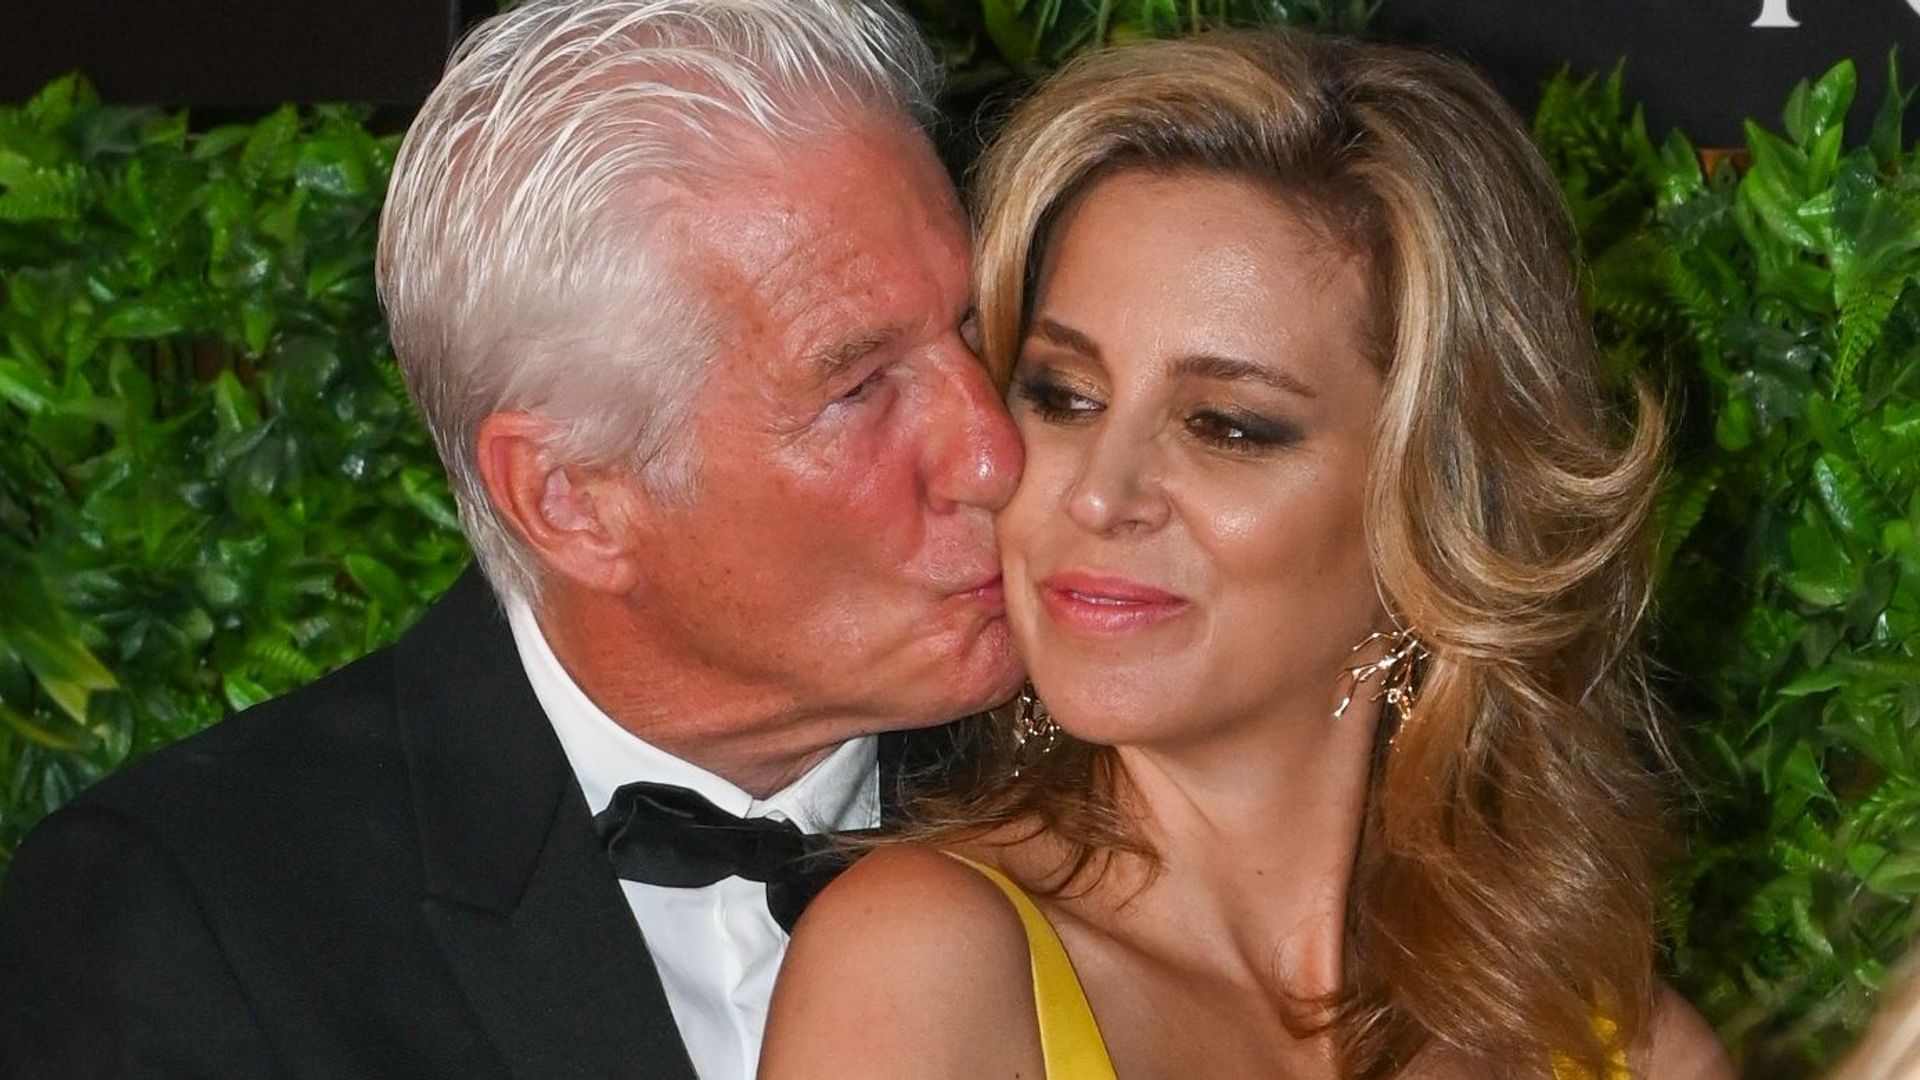 Richard Gere's, 74, 'complicated' love story with wife Alejandra, 41